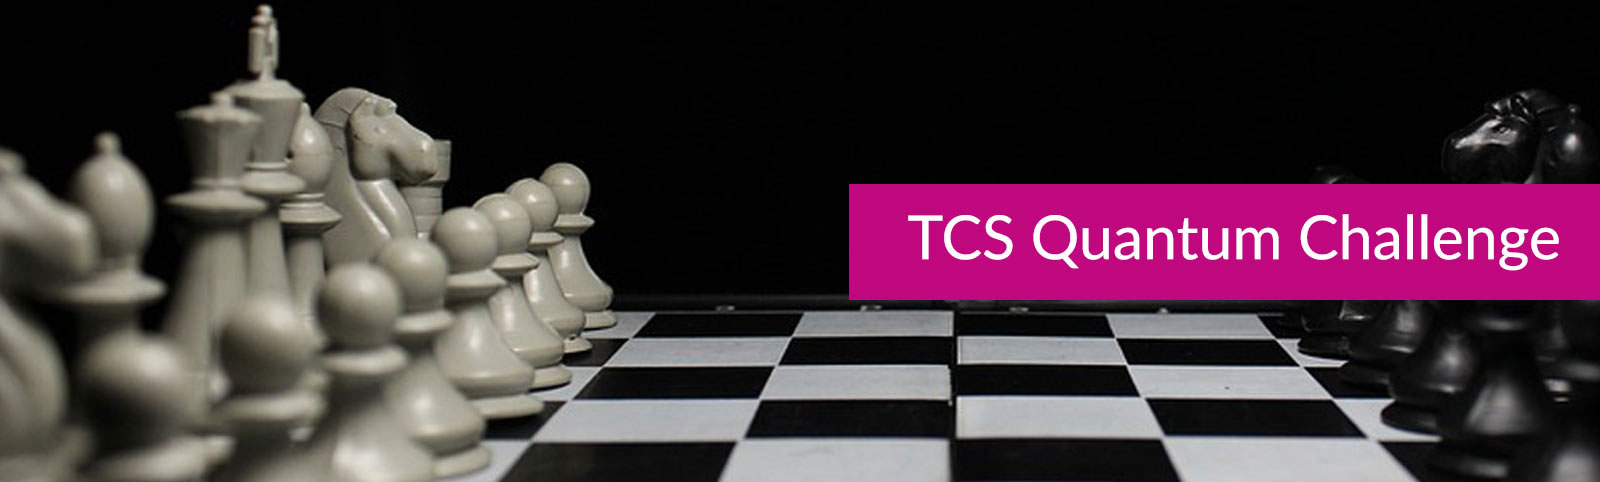 TCS Quantum Challenge Banner.  The words "TCS Quantum Chellenge" superimposed on an image of a chess-board